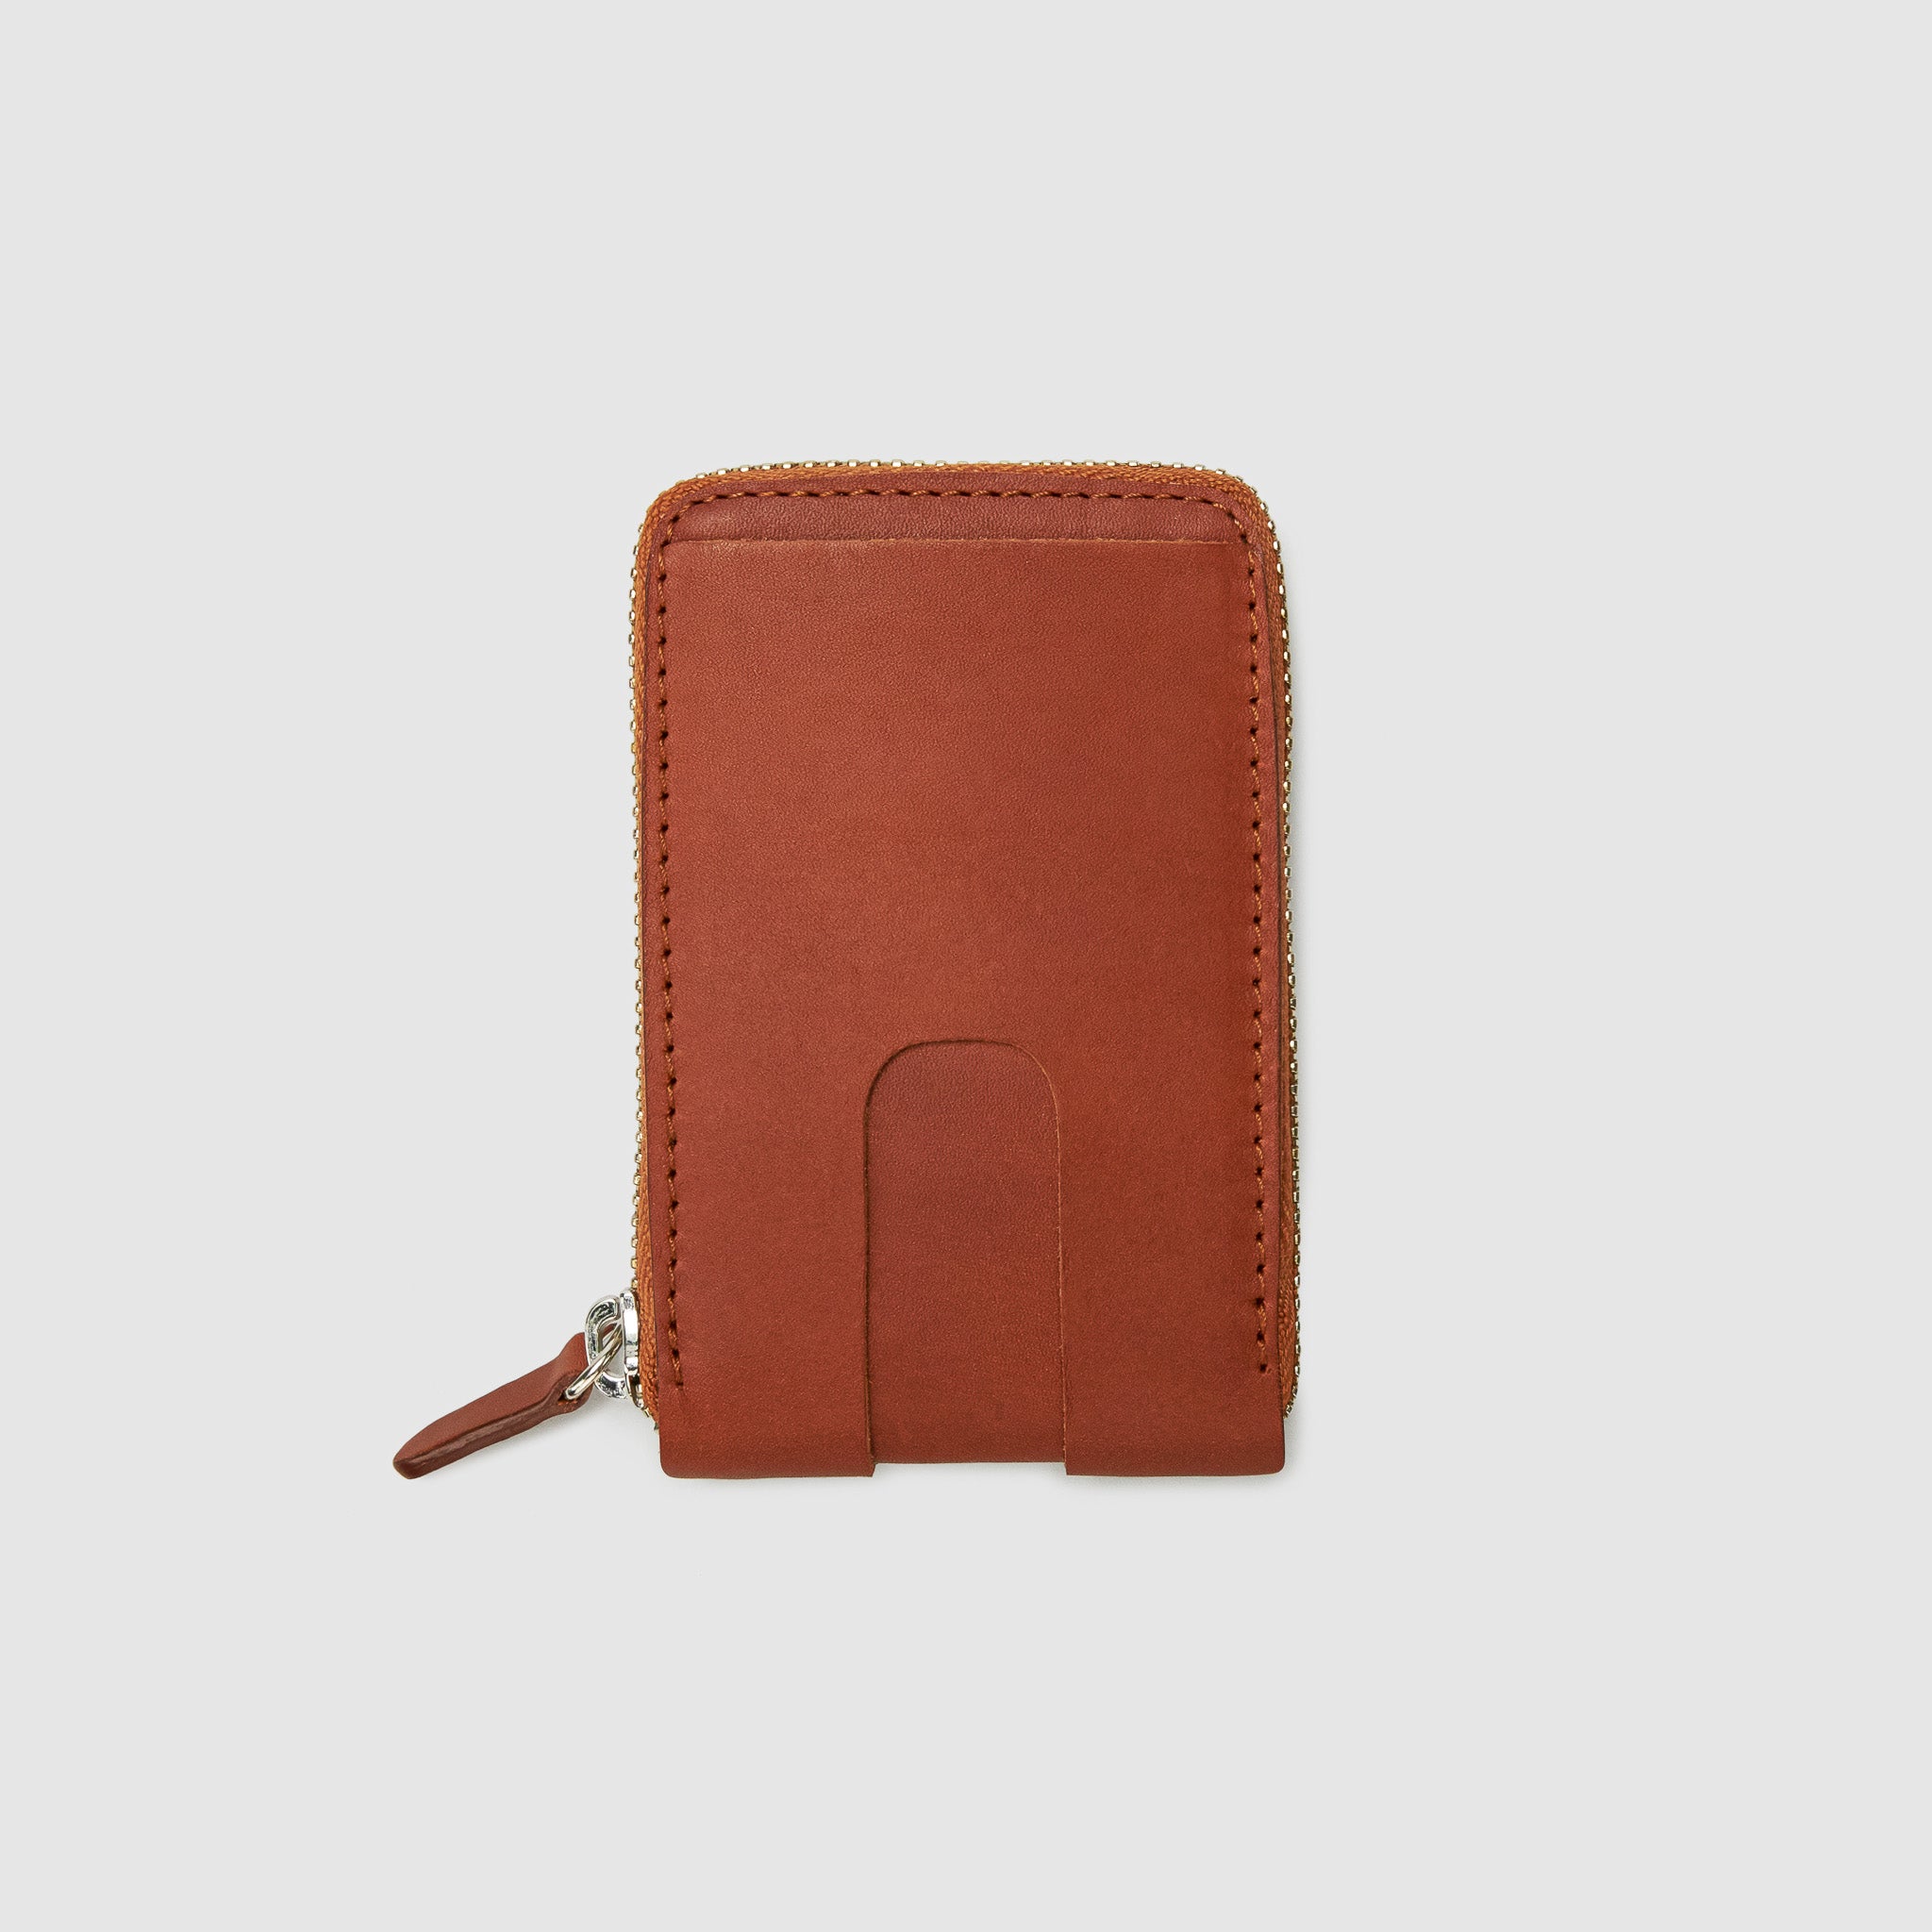 Anson Calder zip-around Wallet with zipper and pockets RFID french calfskin leather _cognac